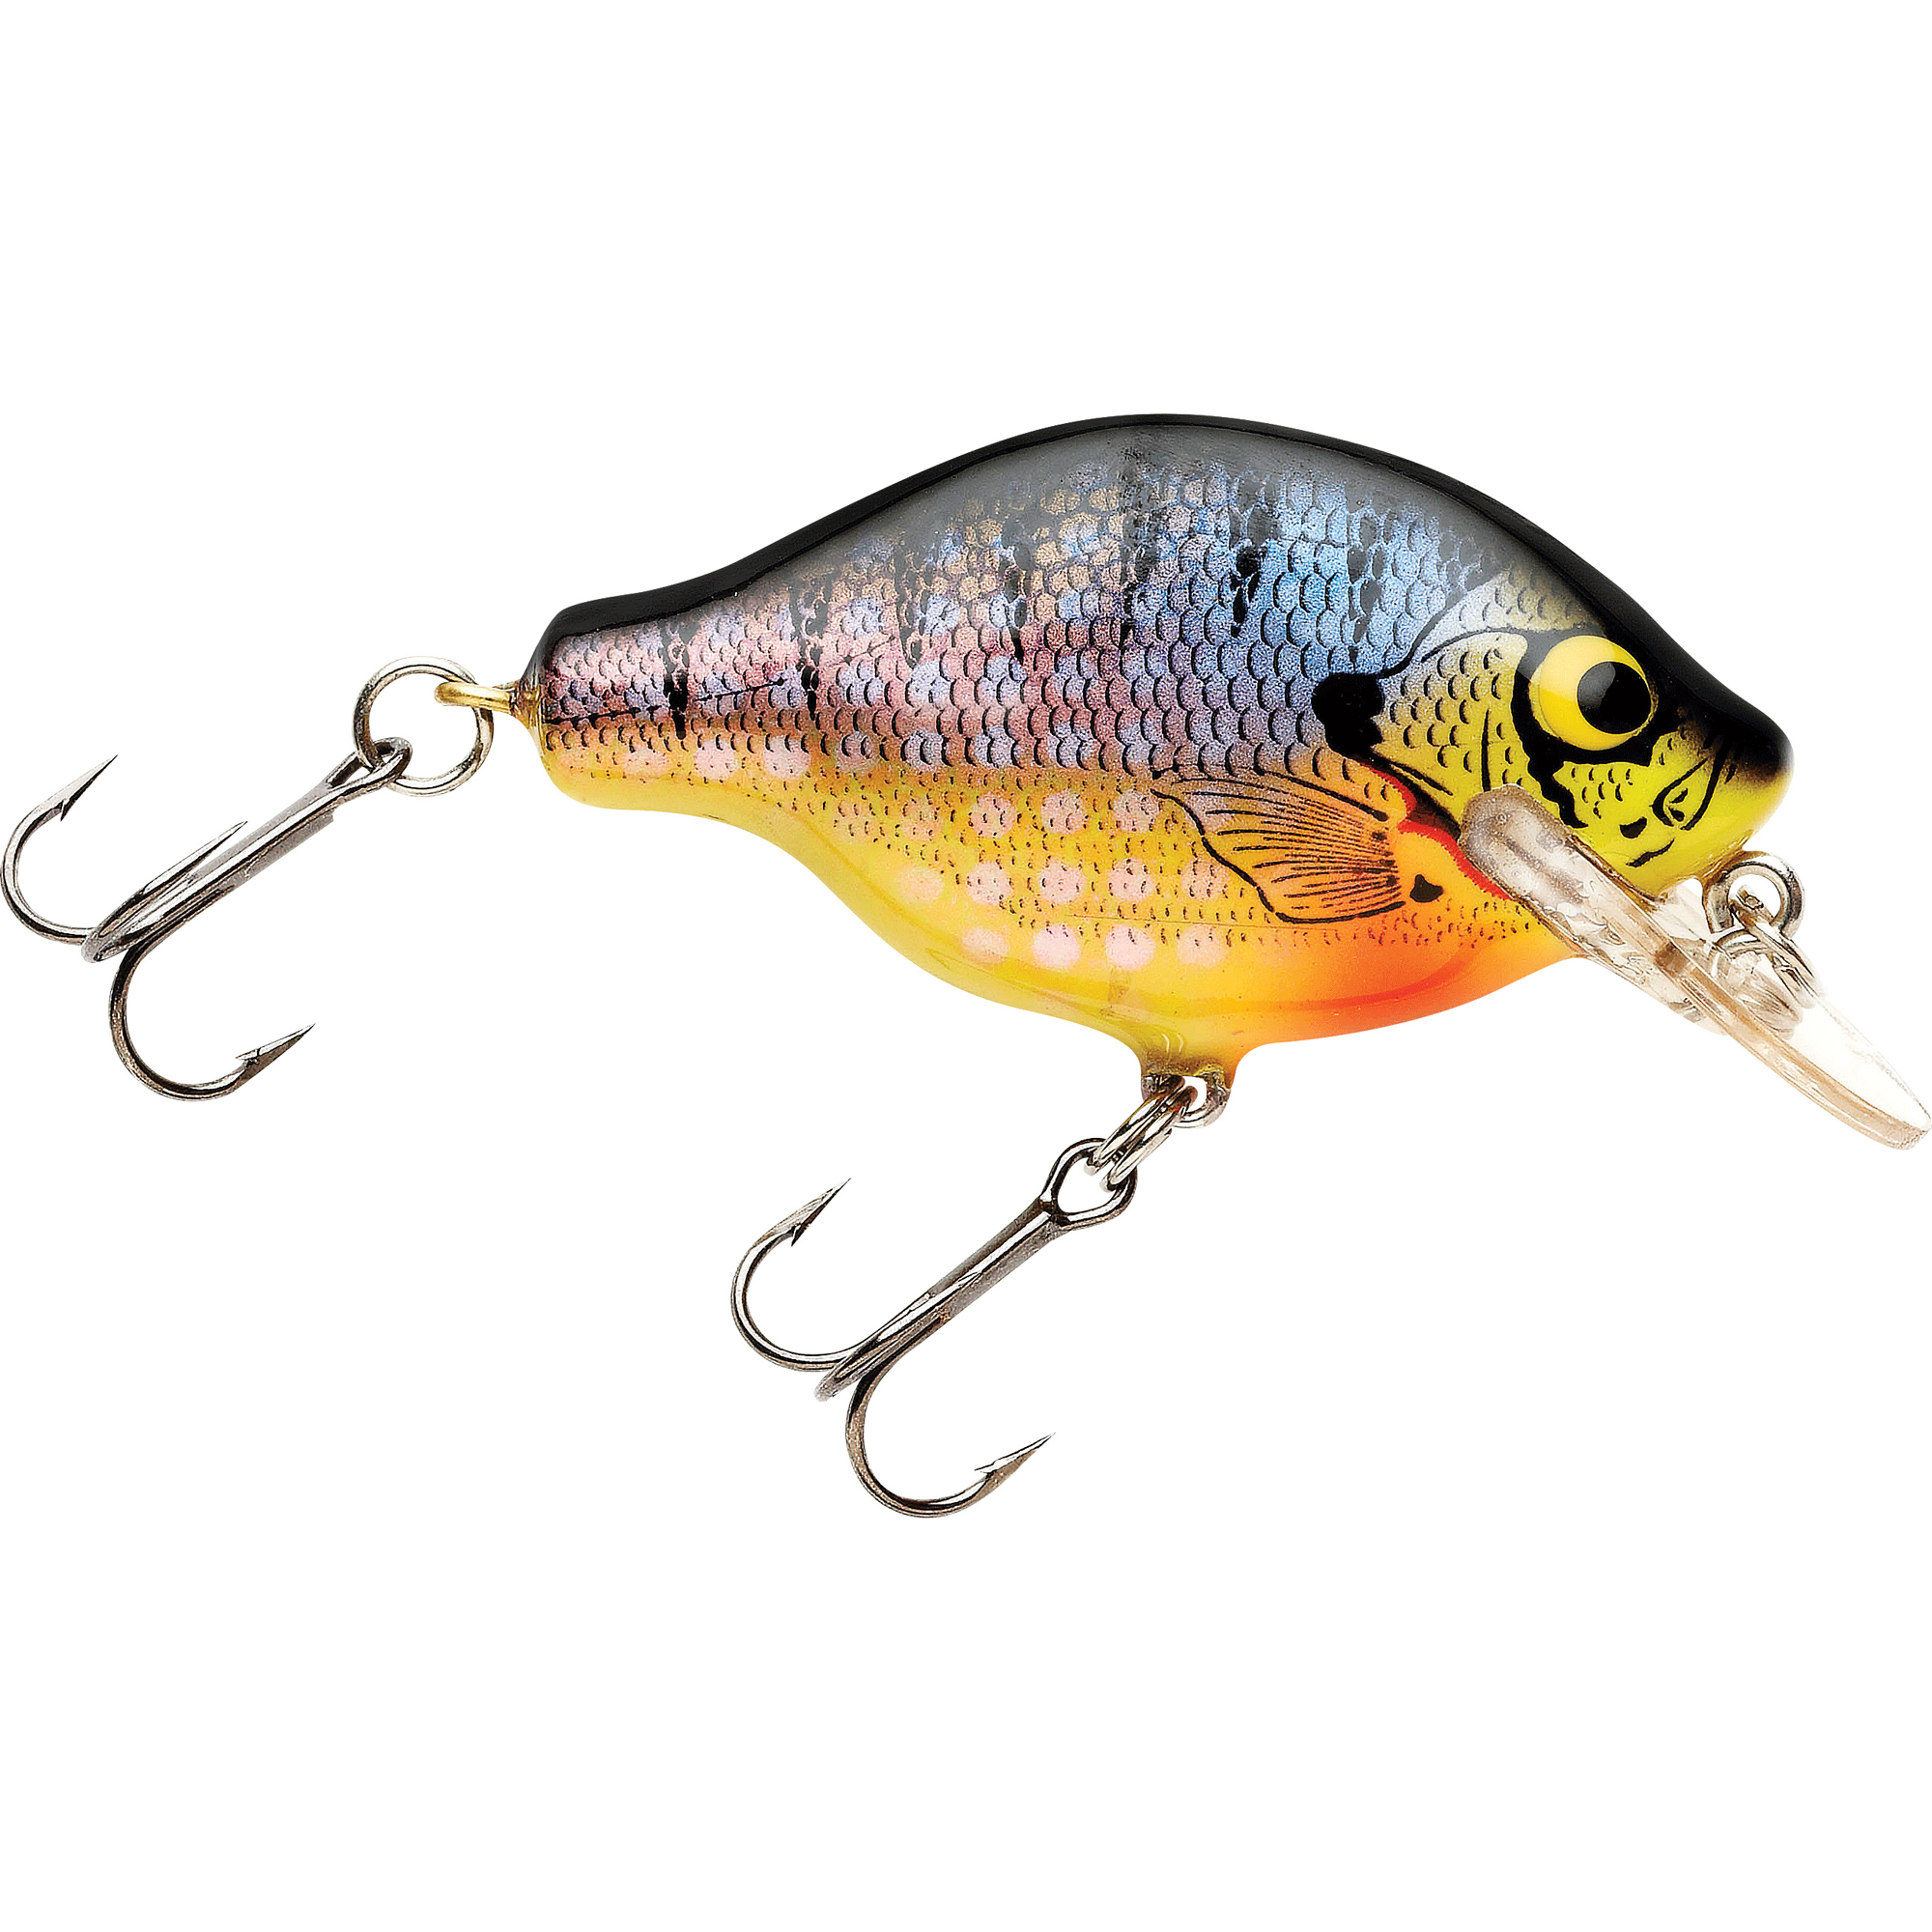 Bagley Shallow Small Fry Shad Shad on White SH4 3 All Brass Crankbait Fish  Lure